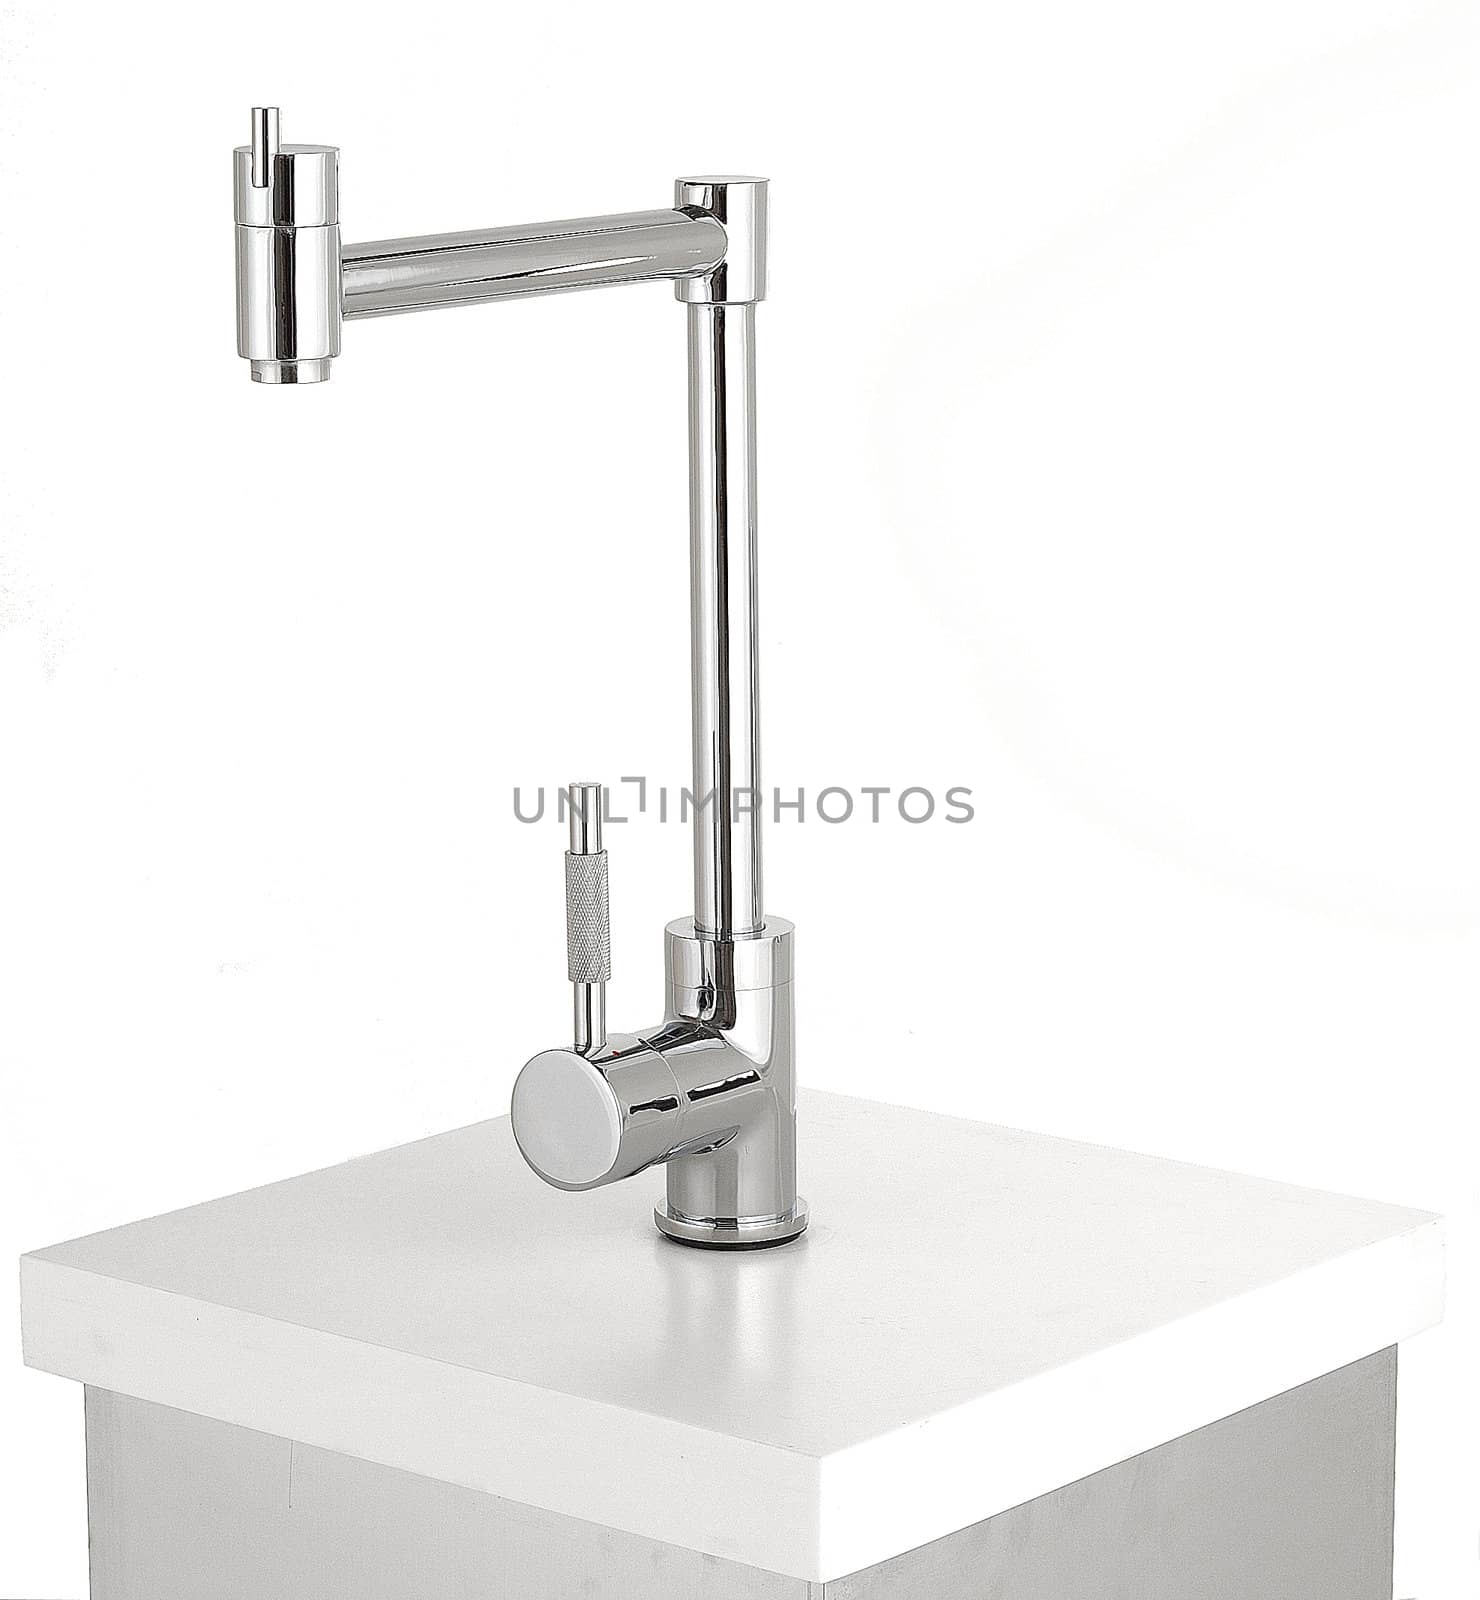 modern dsign water faucet tap over white by keko64